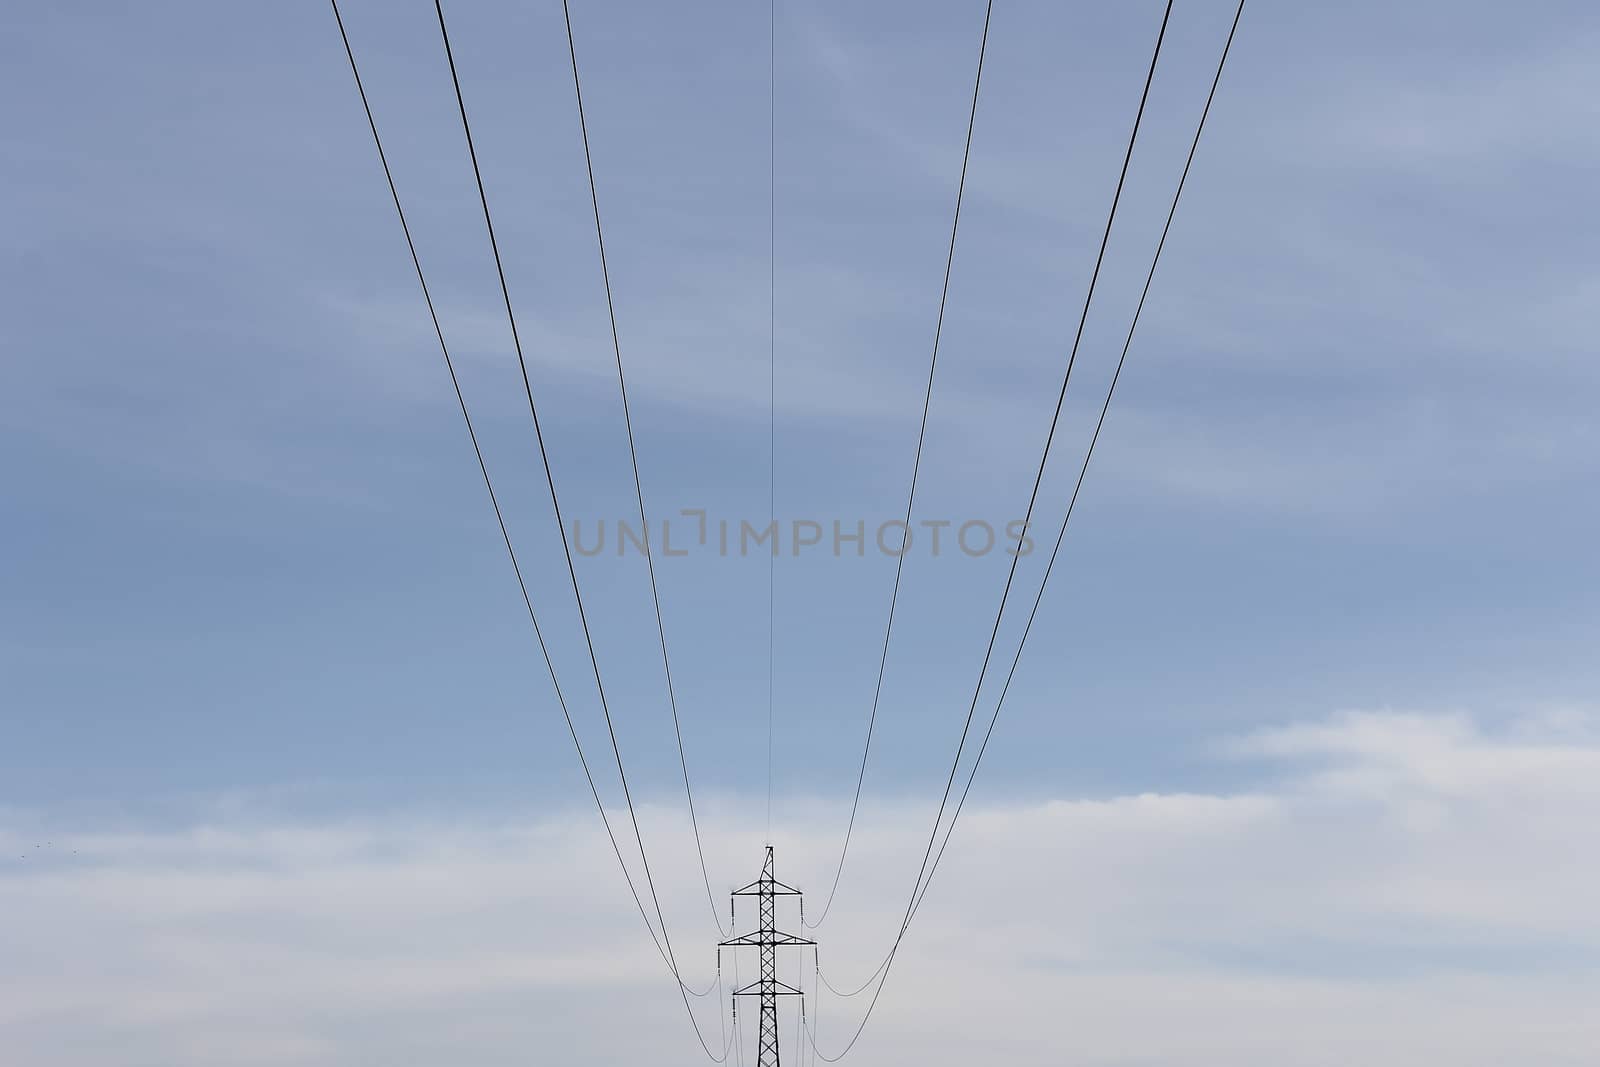 Transmission line electro wire